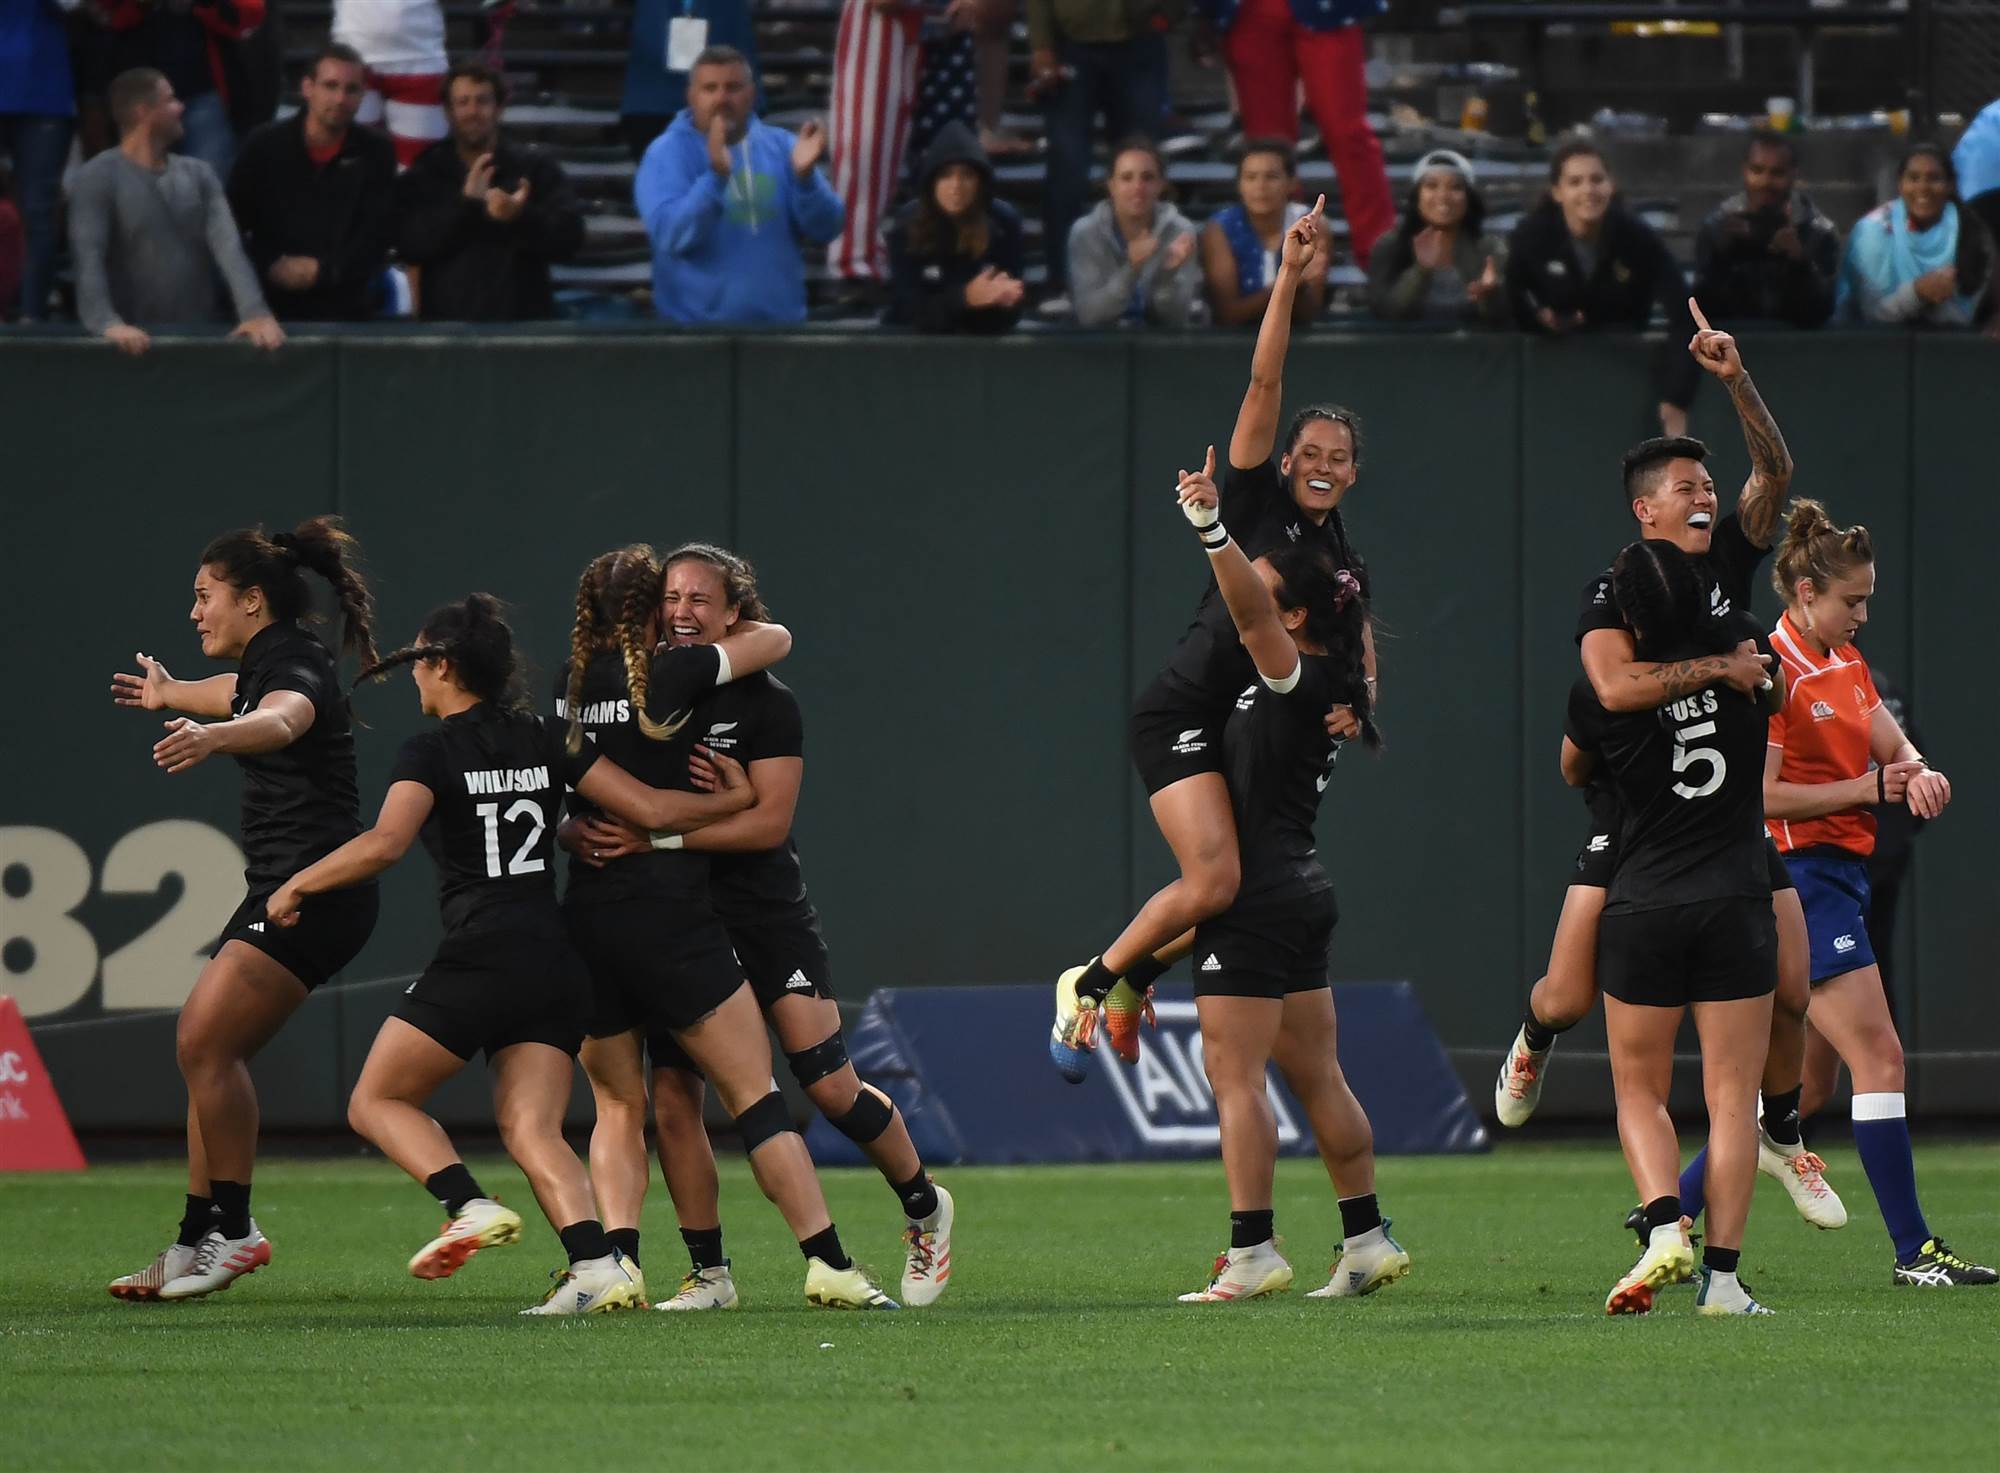 Rugby 7s World Cup wrap Finals The Women's Game Australia's Home